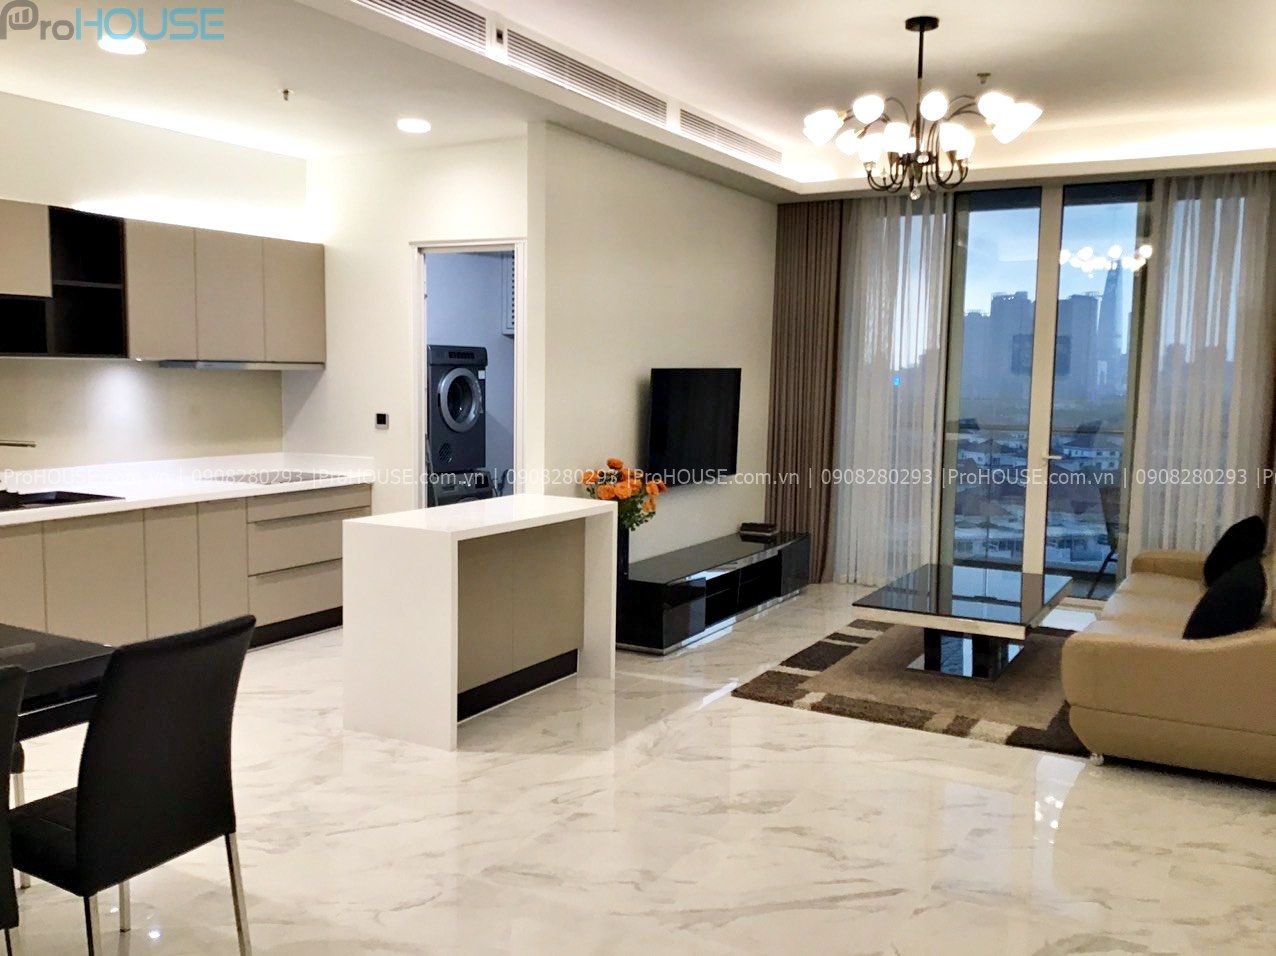 Sarica apartment for rent with 2 bedrooms, modern and comfortable, black and white tone